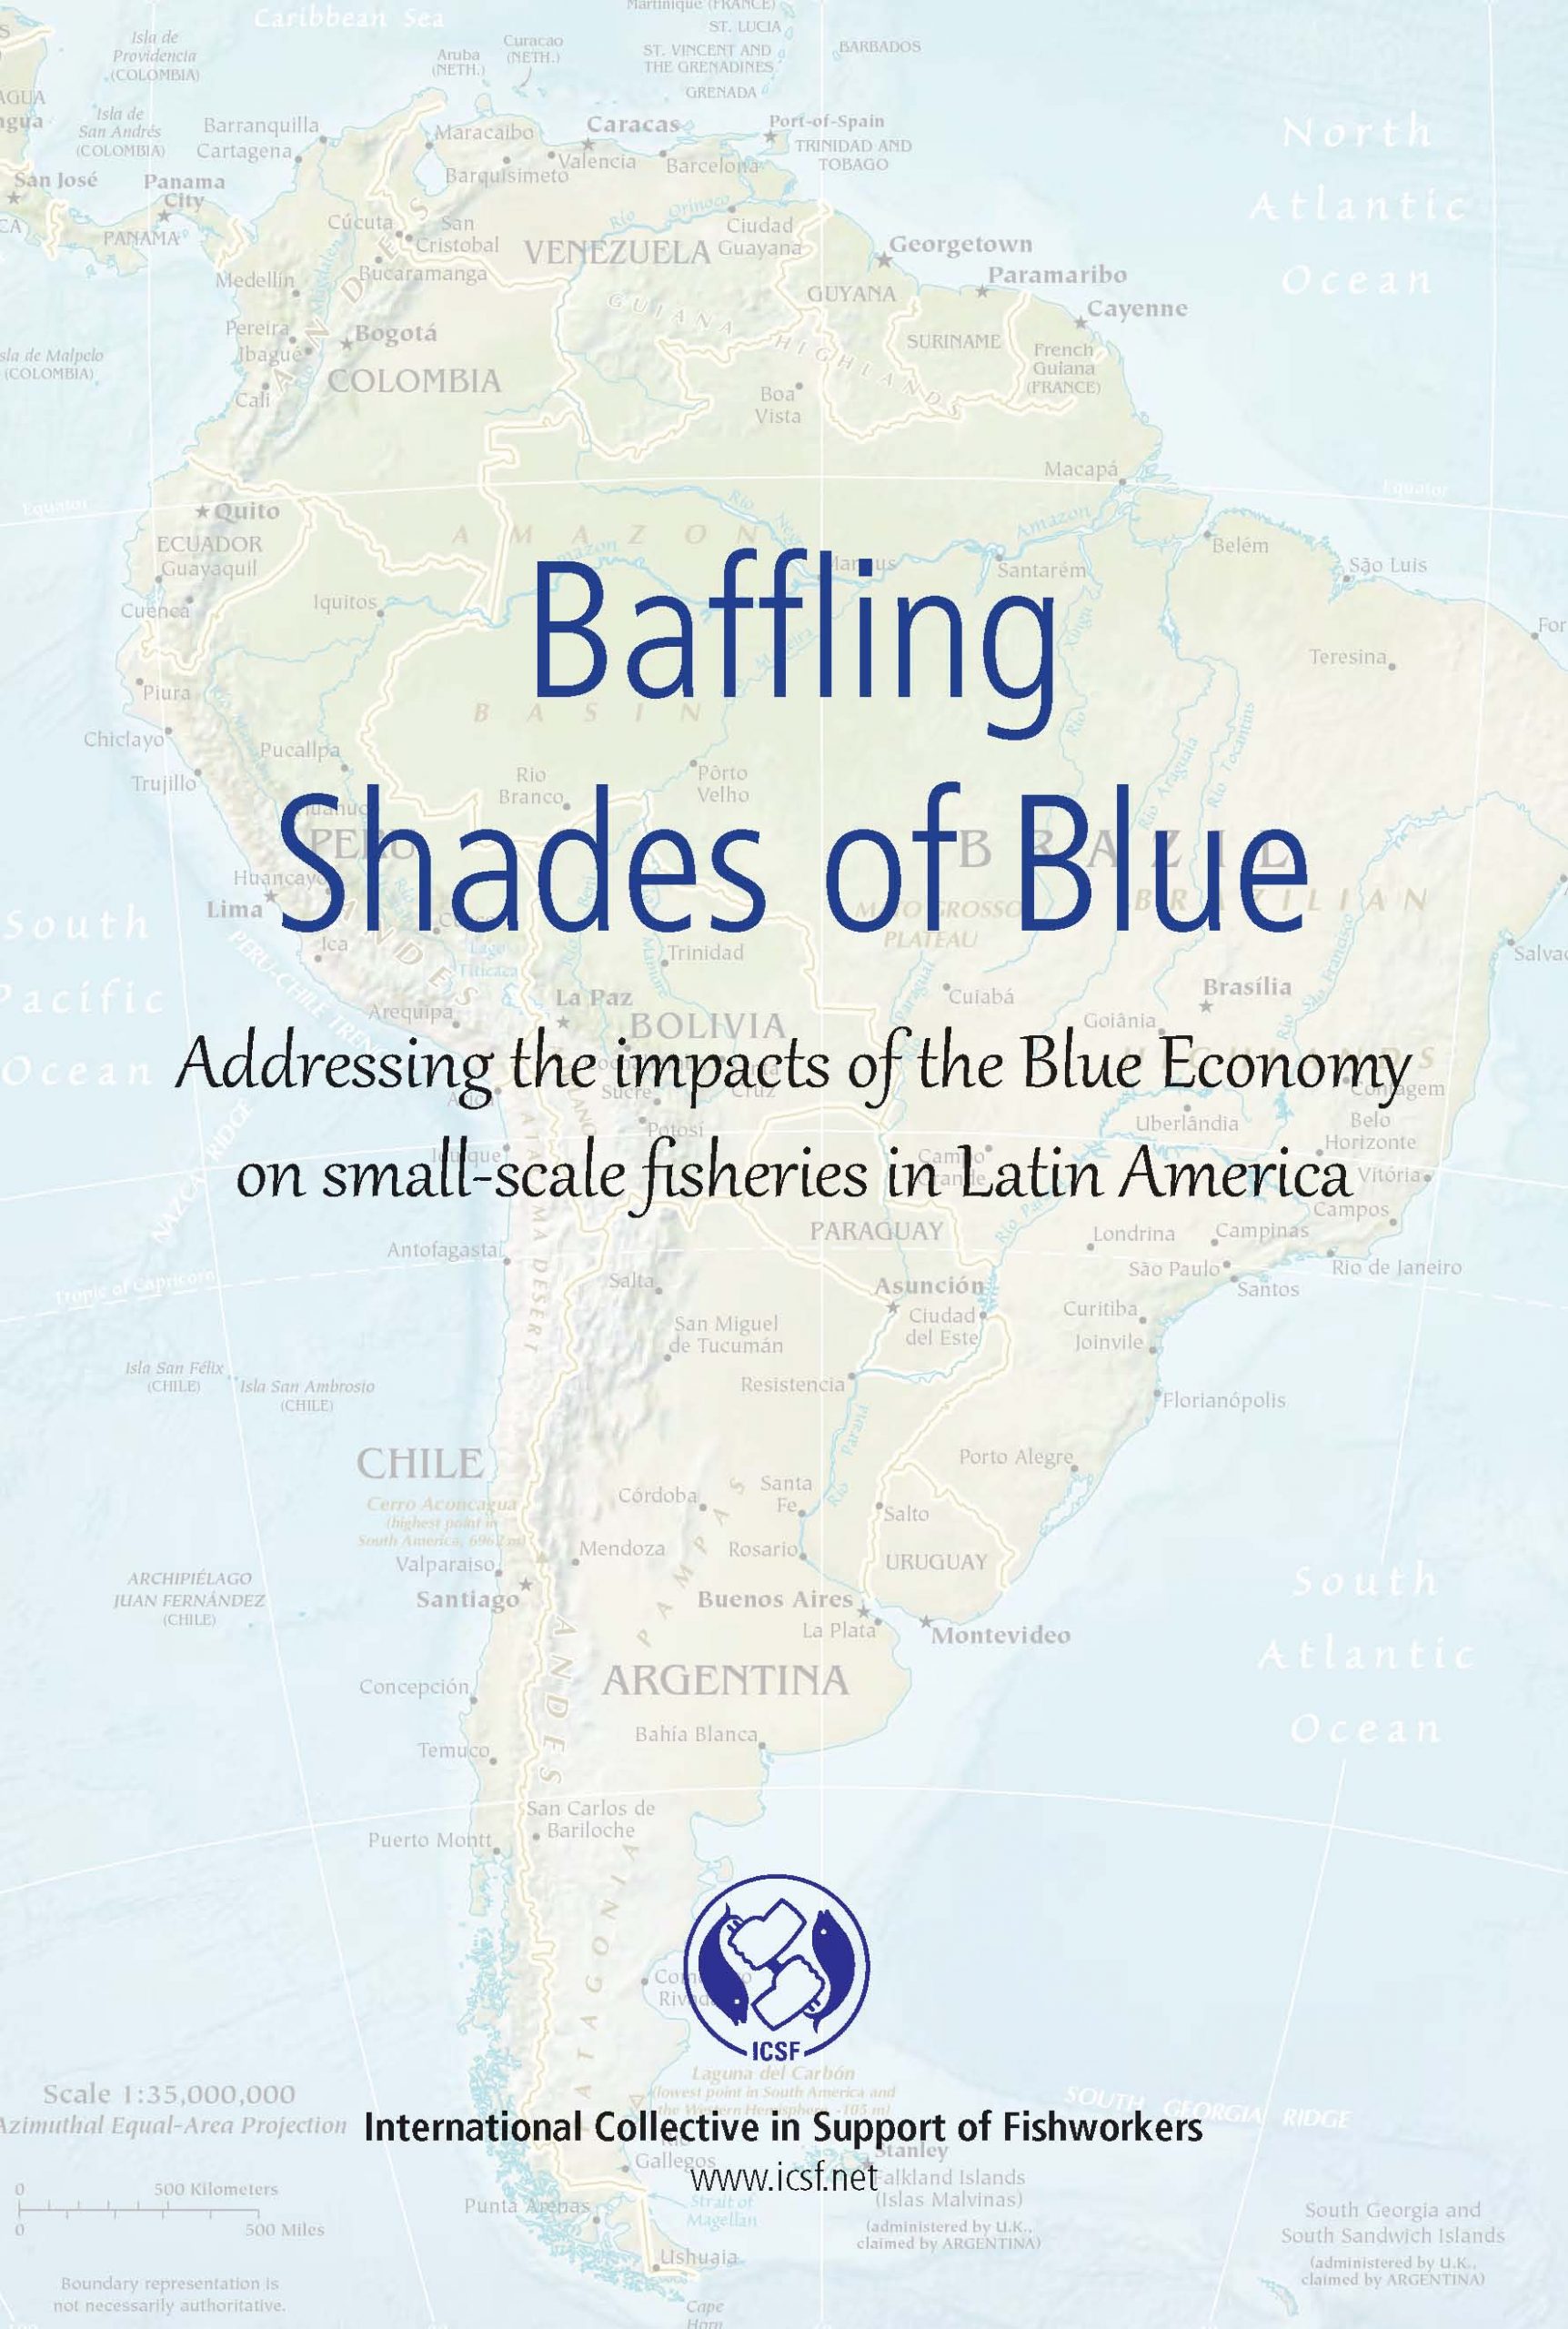 Baffling Shades of Blue: Addressing the impacts of the Blue Economy on small-scale fisheries in Latin America by Leopoldo Cavaleri Gerhardinger et al.